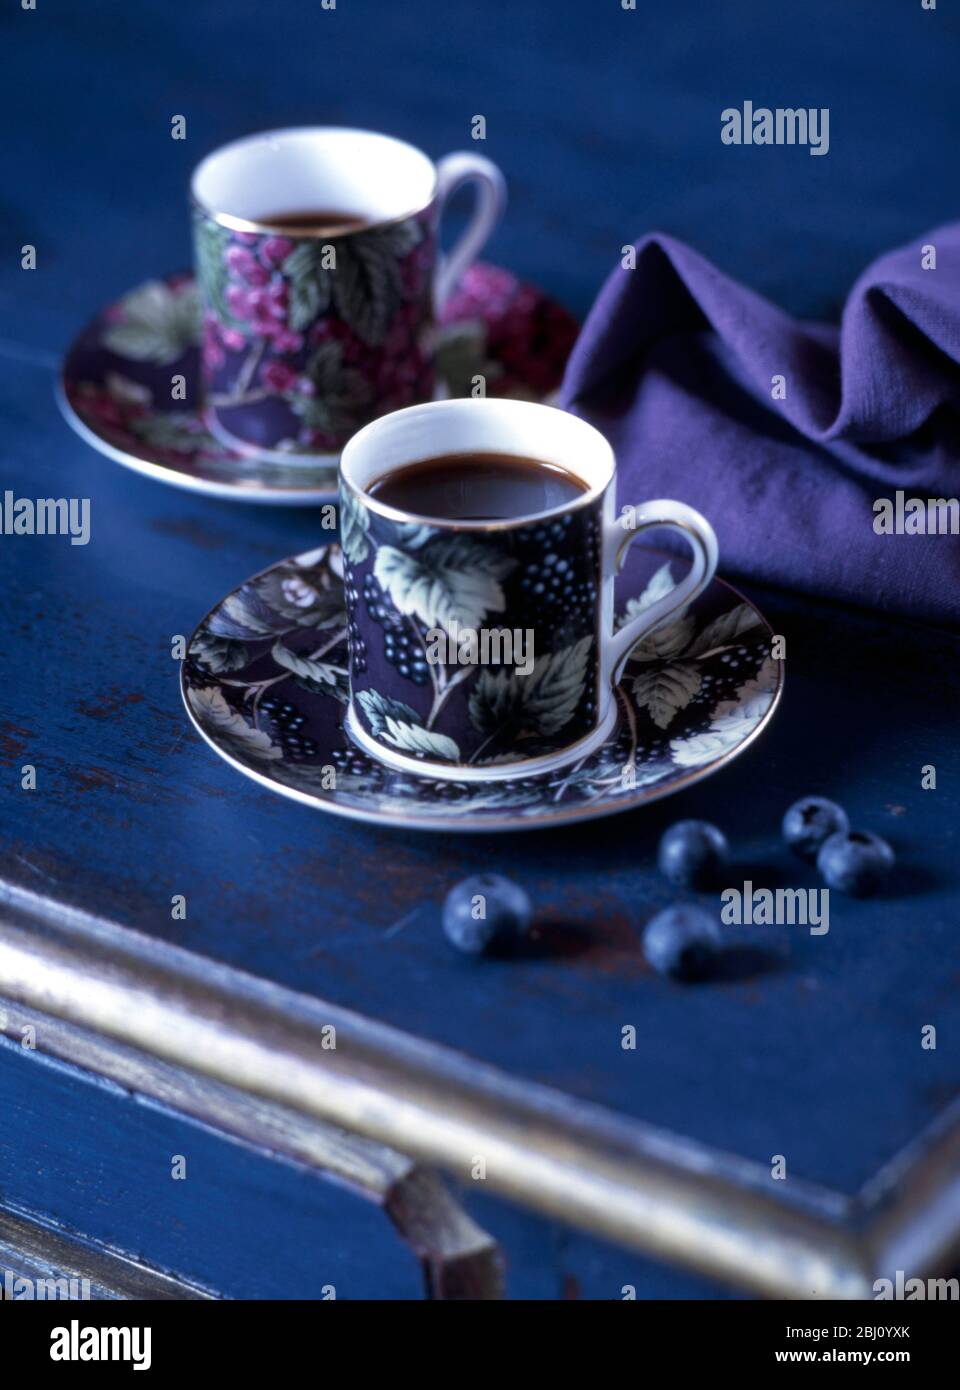 A pair of decorated coffee cups on dark blue surface with napkin and blueberries - Stock Photo